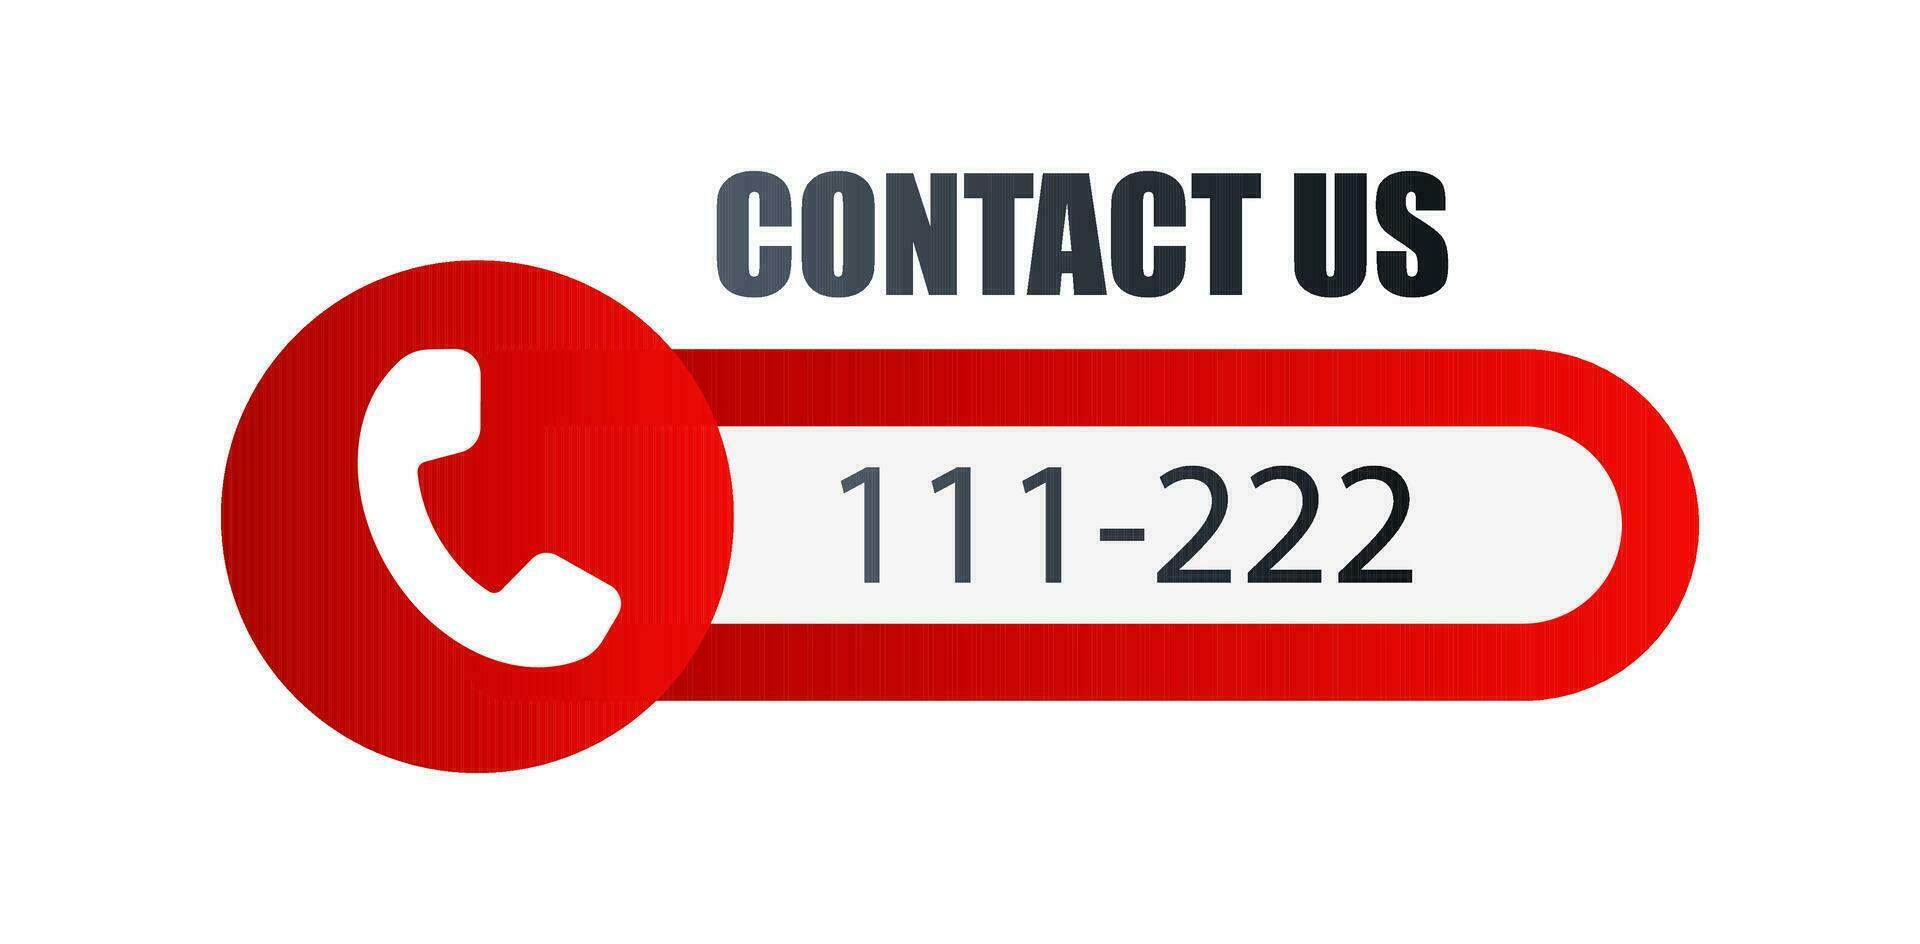 Contact us mobile phone call banner with place for number. Call back template vector